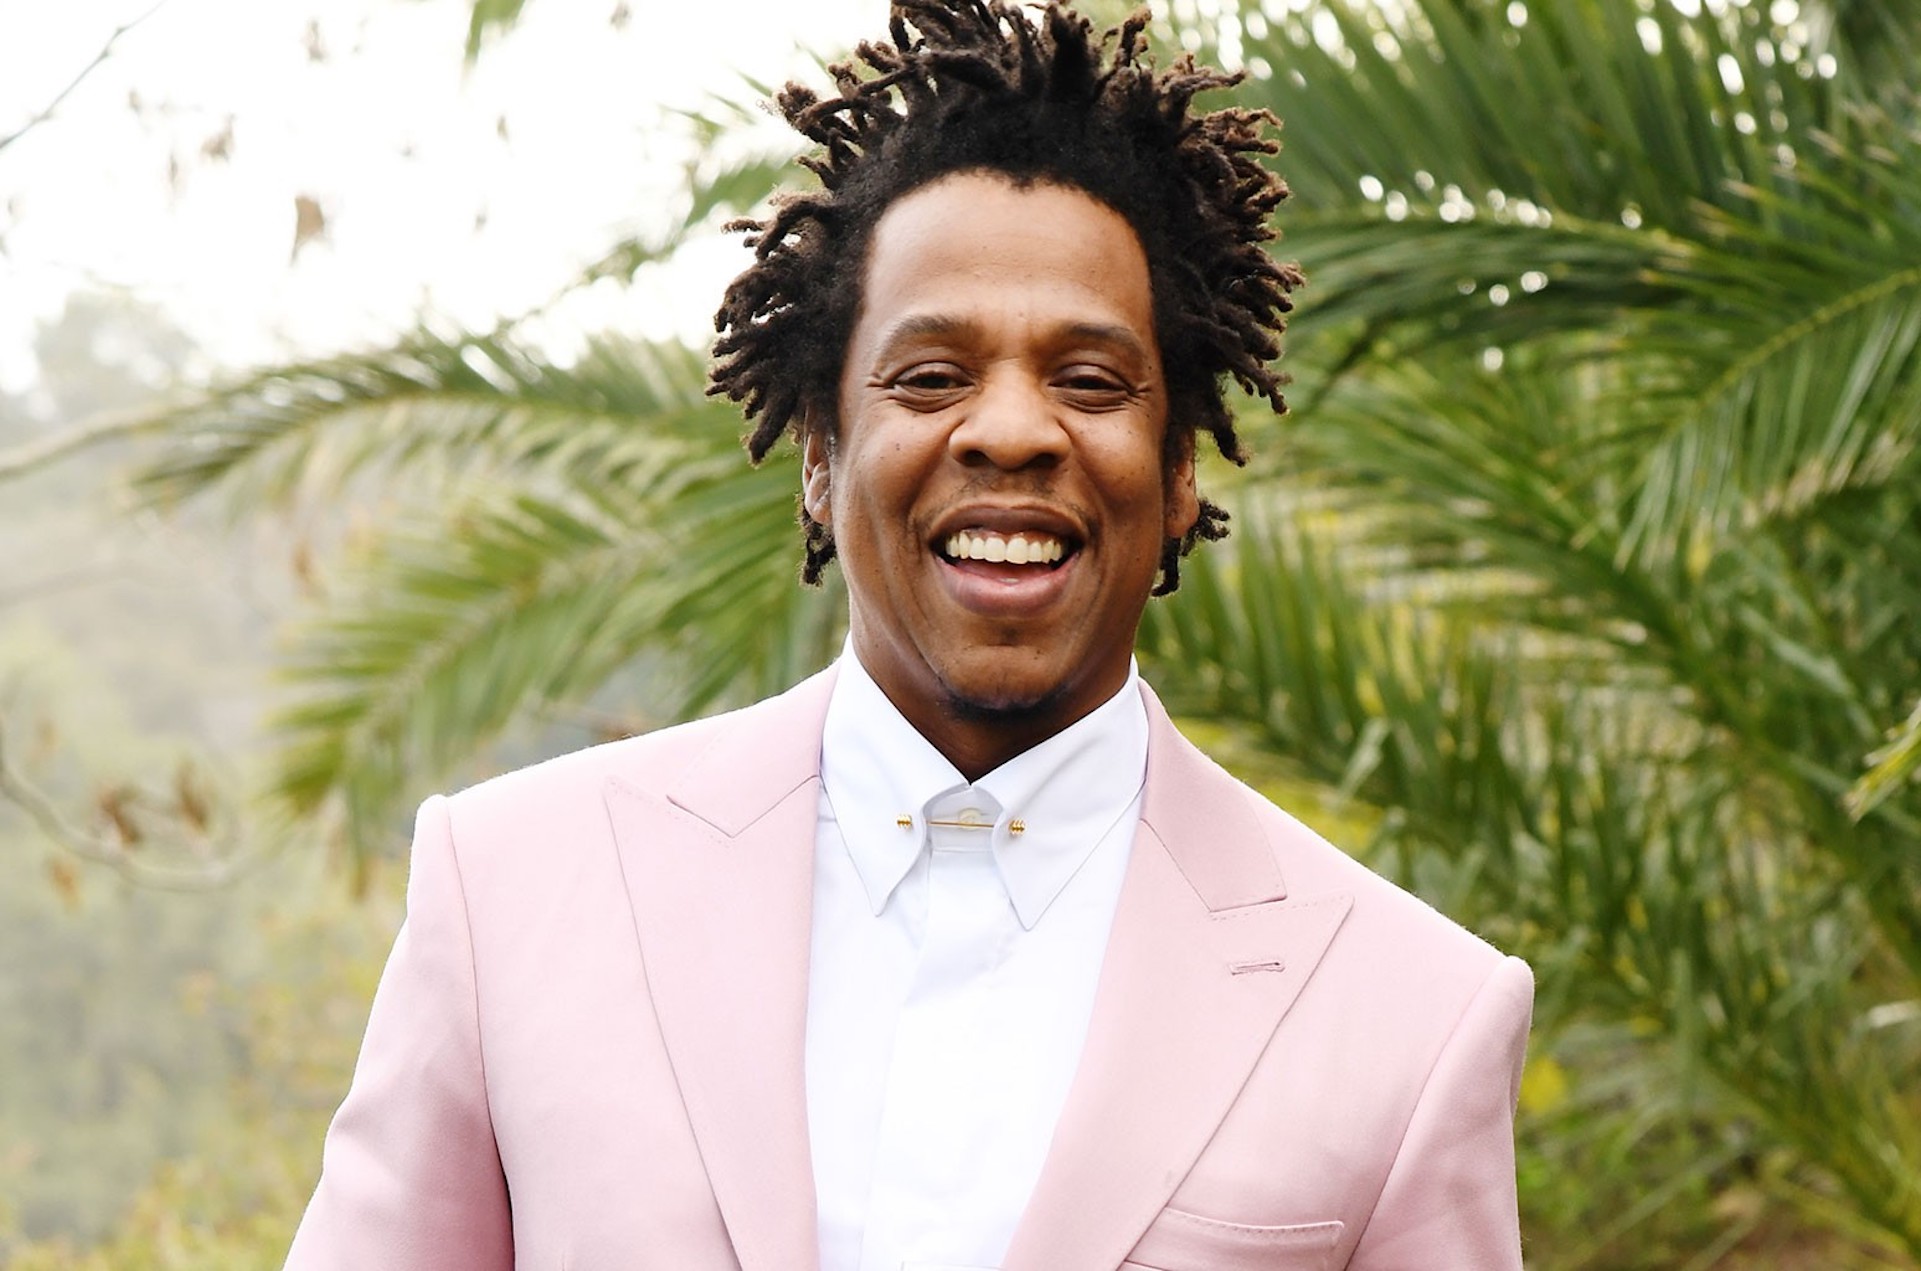 JAYZ's Monogram makes its debut Leafly